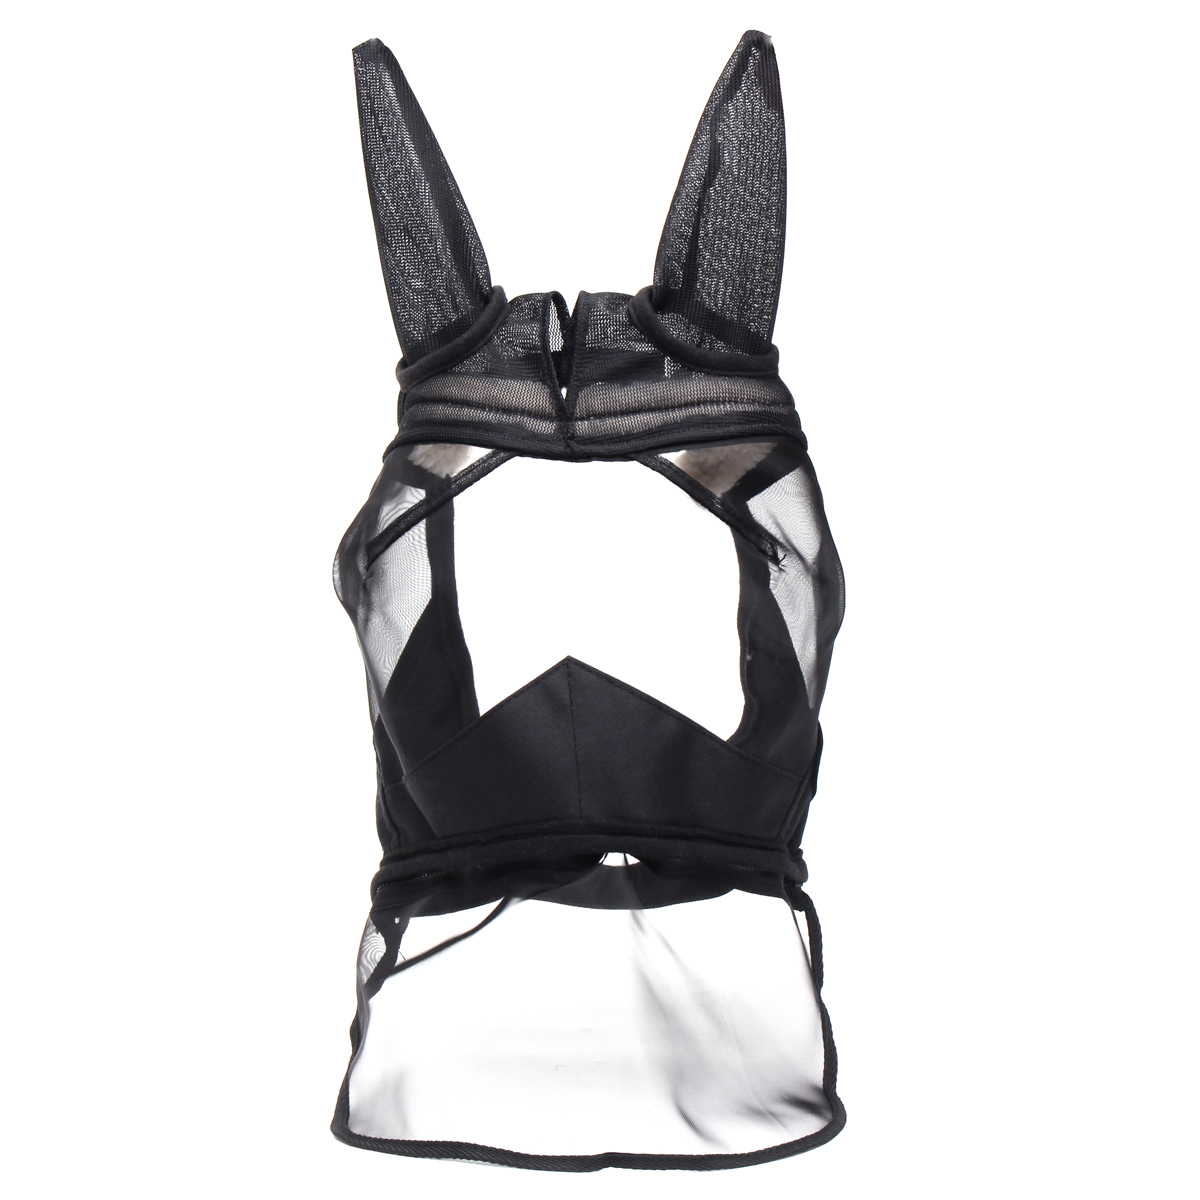 Deluxe-Horse-Fly-Mask-with-Ears-Mesh-Anti-mosquito-Zipper-Style-PonyCobFull-Horse-Spurs-1633817-2